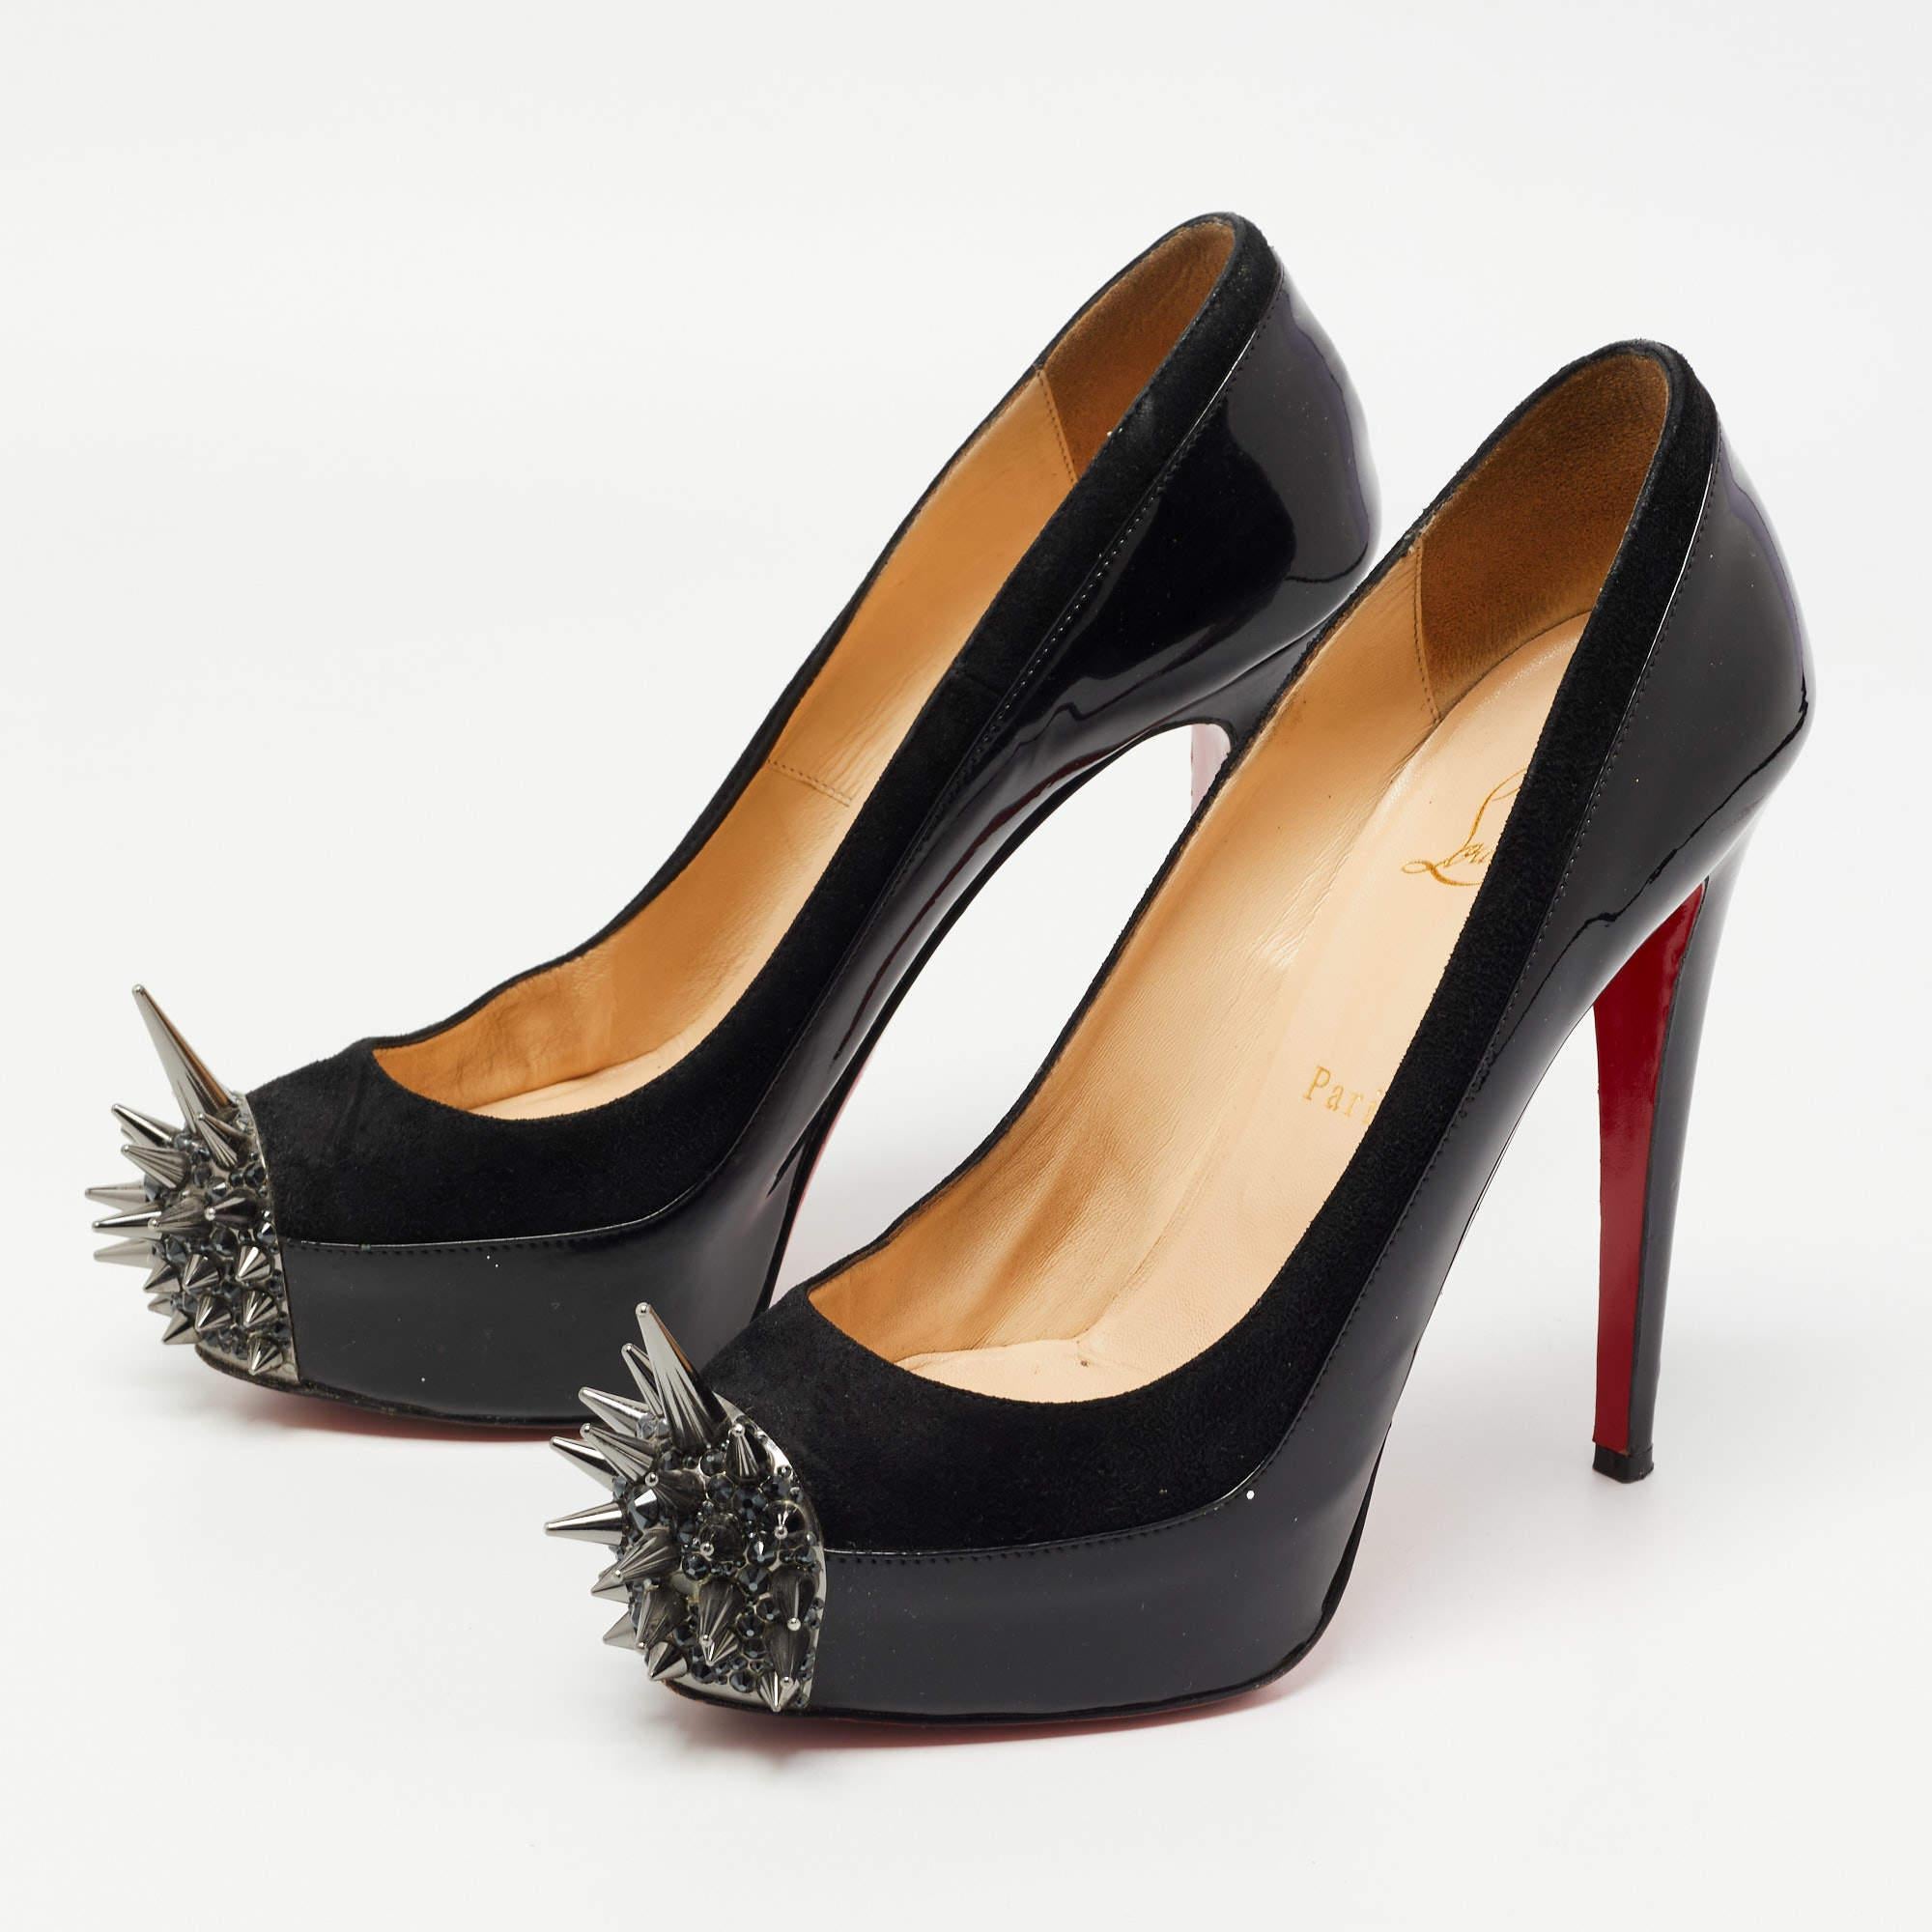 Christian Louboutin Black Patent and Suede Asteroid Pumps Size 38.5 For Sale 1